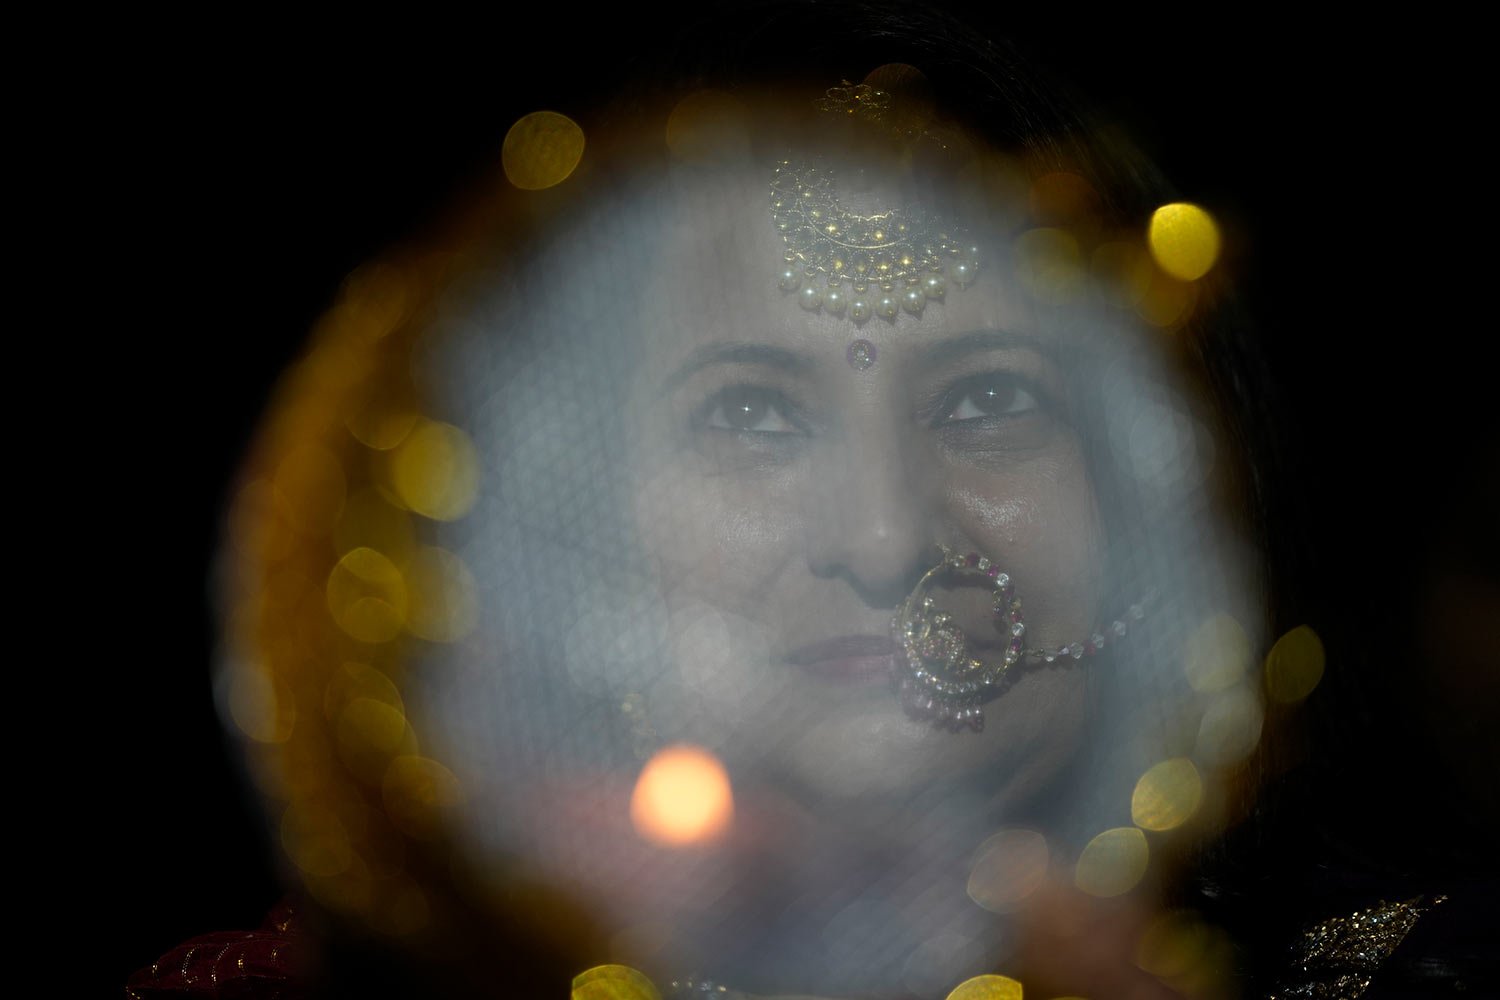  A married Hindu woman looks at the moon through a sieve as part of a ritual to break her fast during Karva Chauth festival in Jammu, India, Thursday, Oct. 13, 2022. (AP Photo/Channi Anand) 